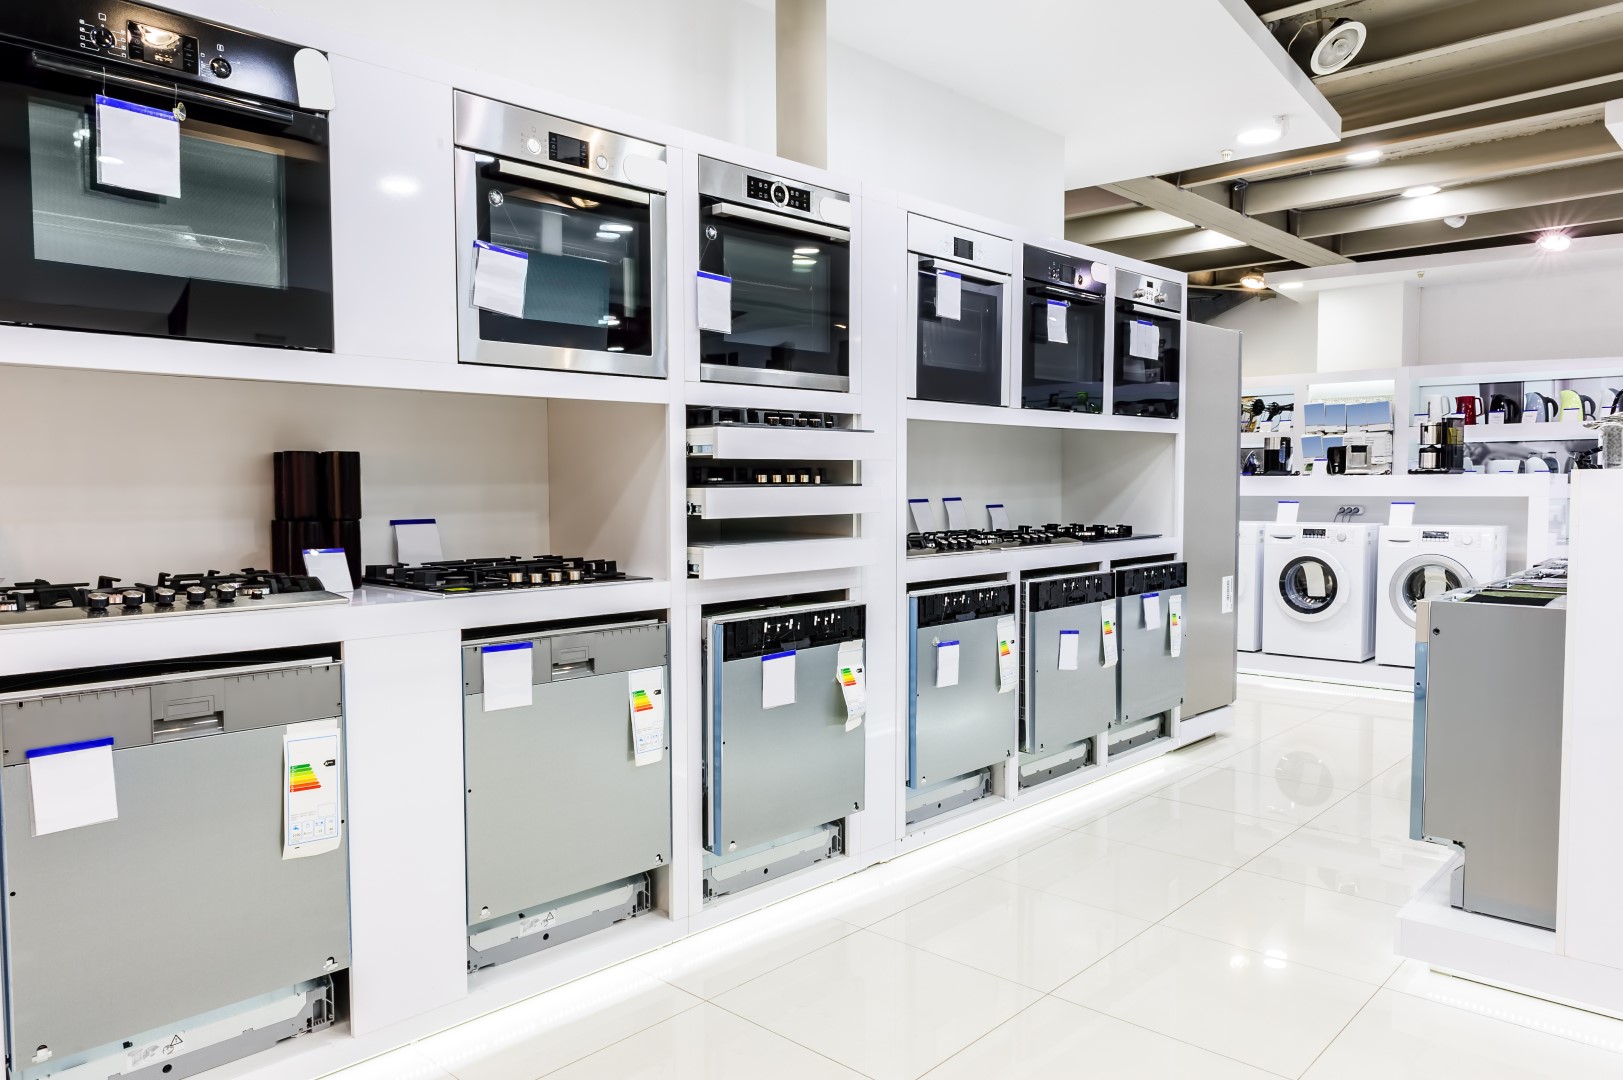 Brace Yourself for Big Deals on Appliances on Black Friday